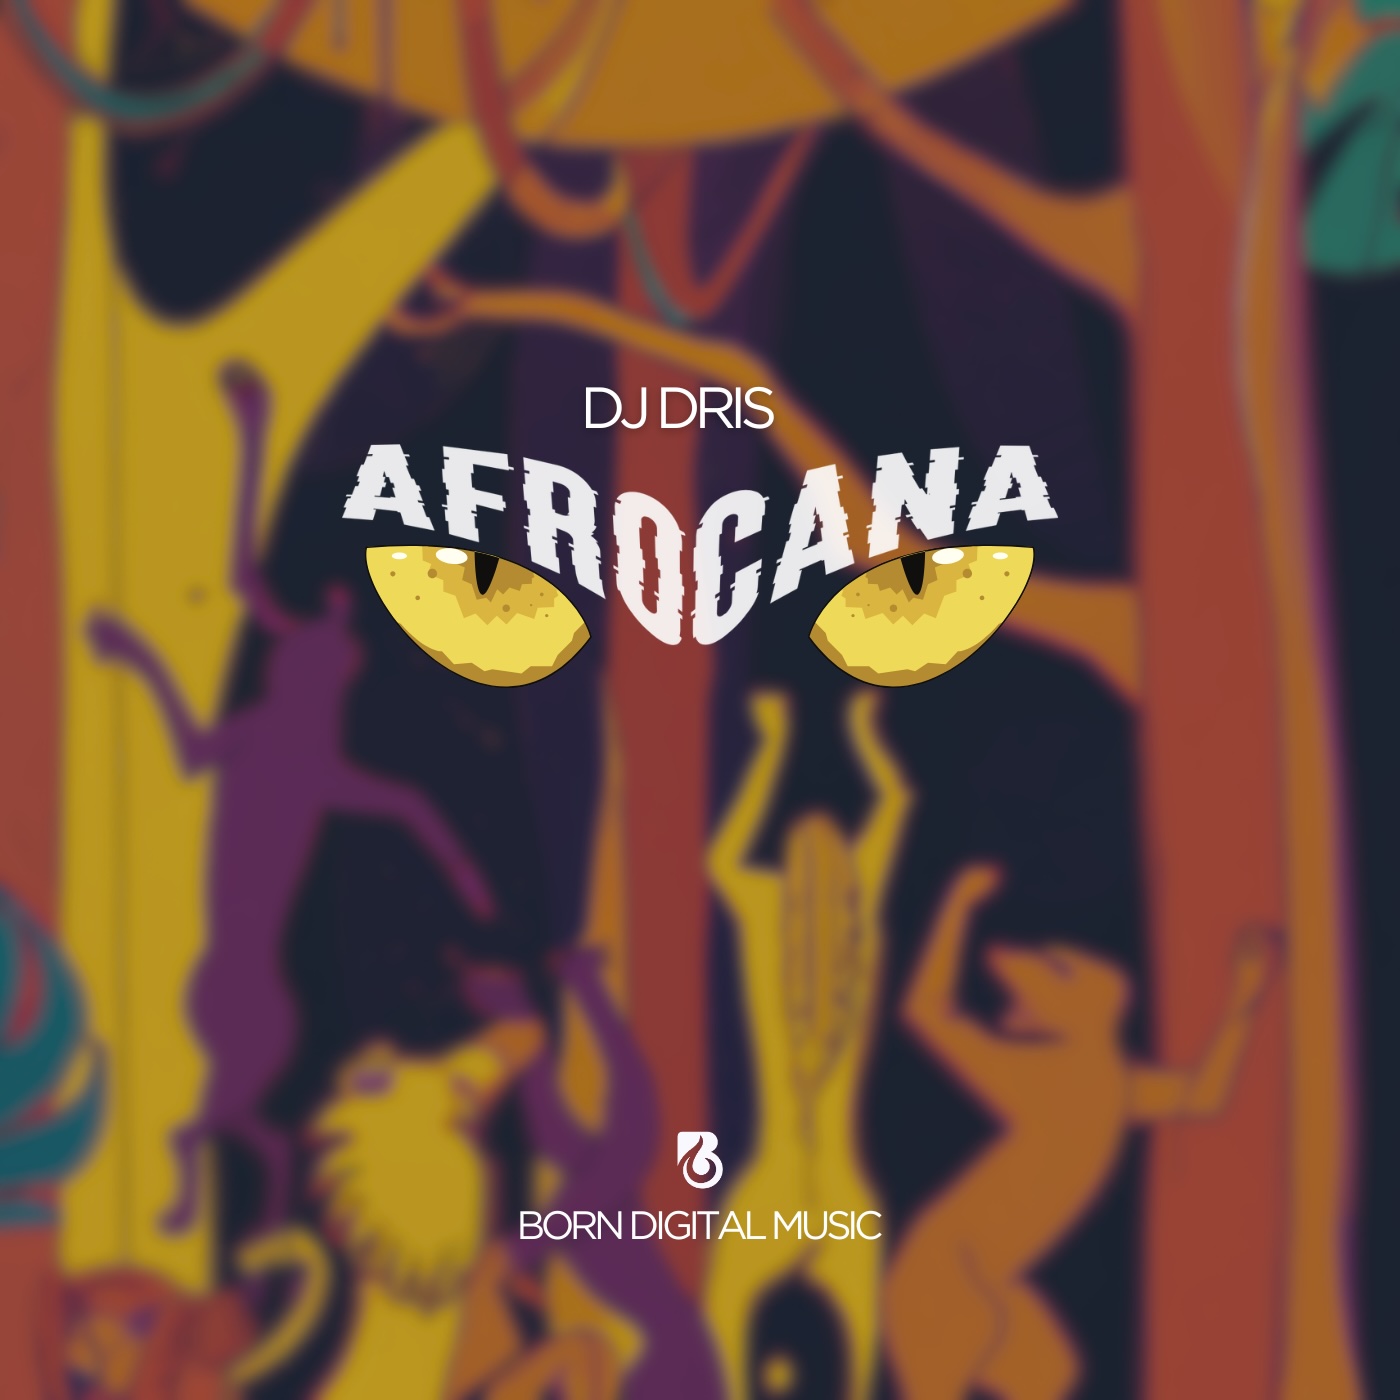 DJ Dris' 'Afrocana' Introduces Intoxicating Layers of Sound and Funky Rhythms